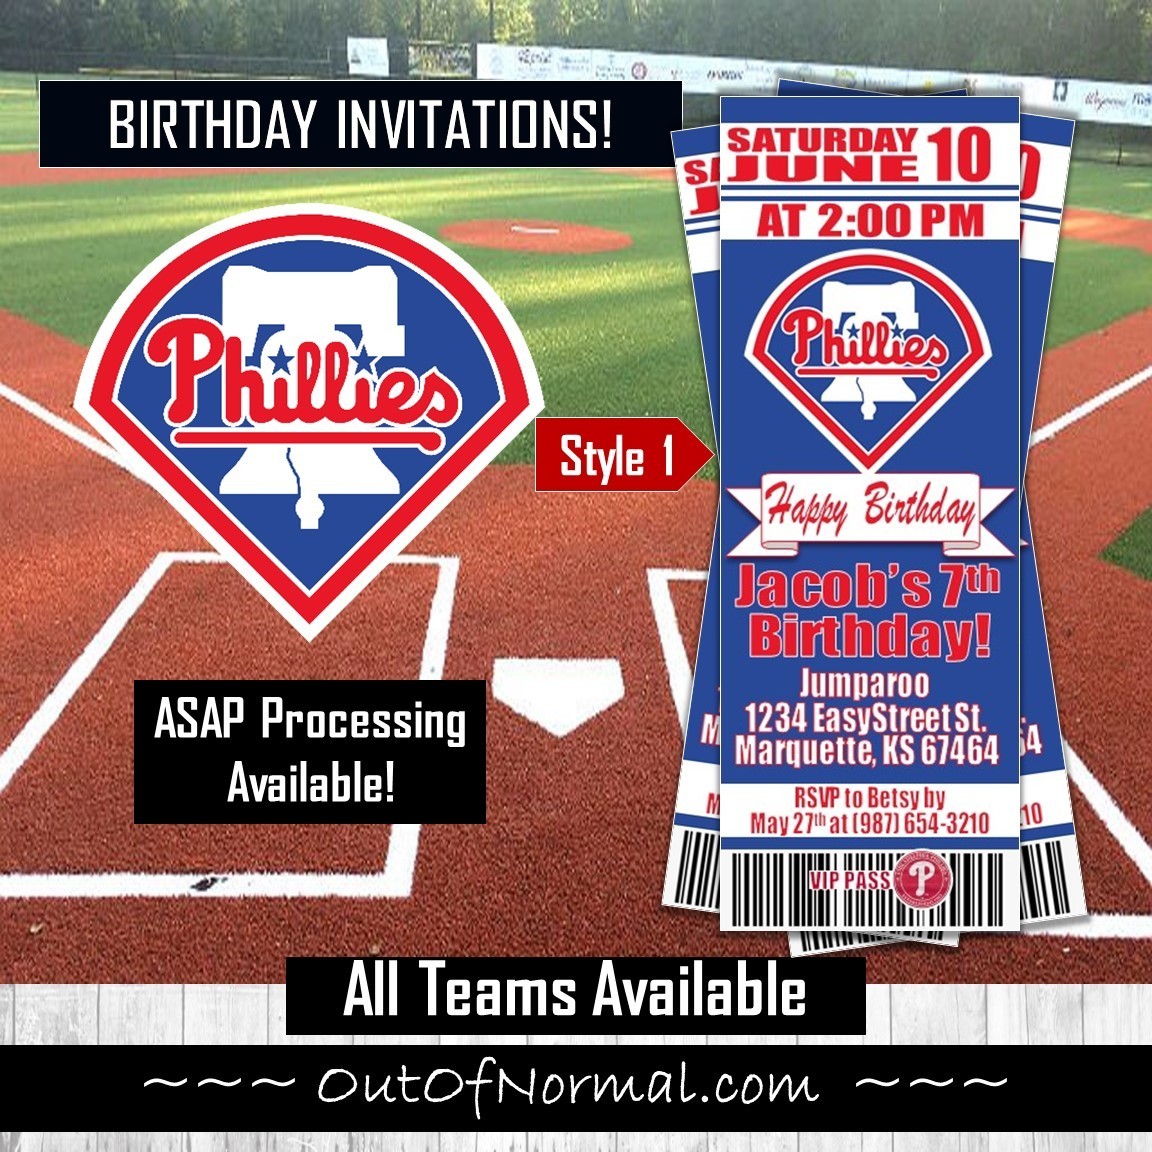 Philadelphia Phillies on Twitter Free tickets Lets do it For a chance  to win tag us and use BudLightStimmyTix and Sweepstakes Rules  httpstcogTBpIfwdOj httpstcoQqSVnFsn7S  X